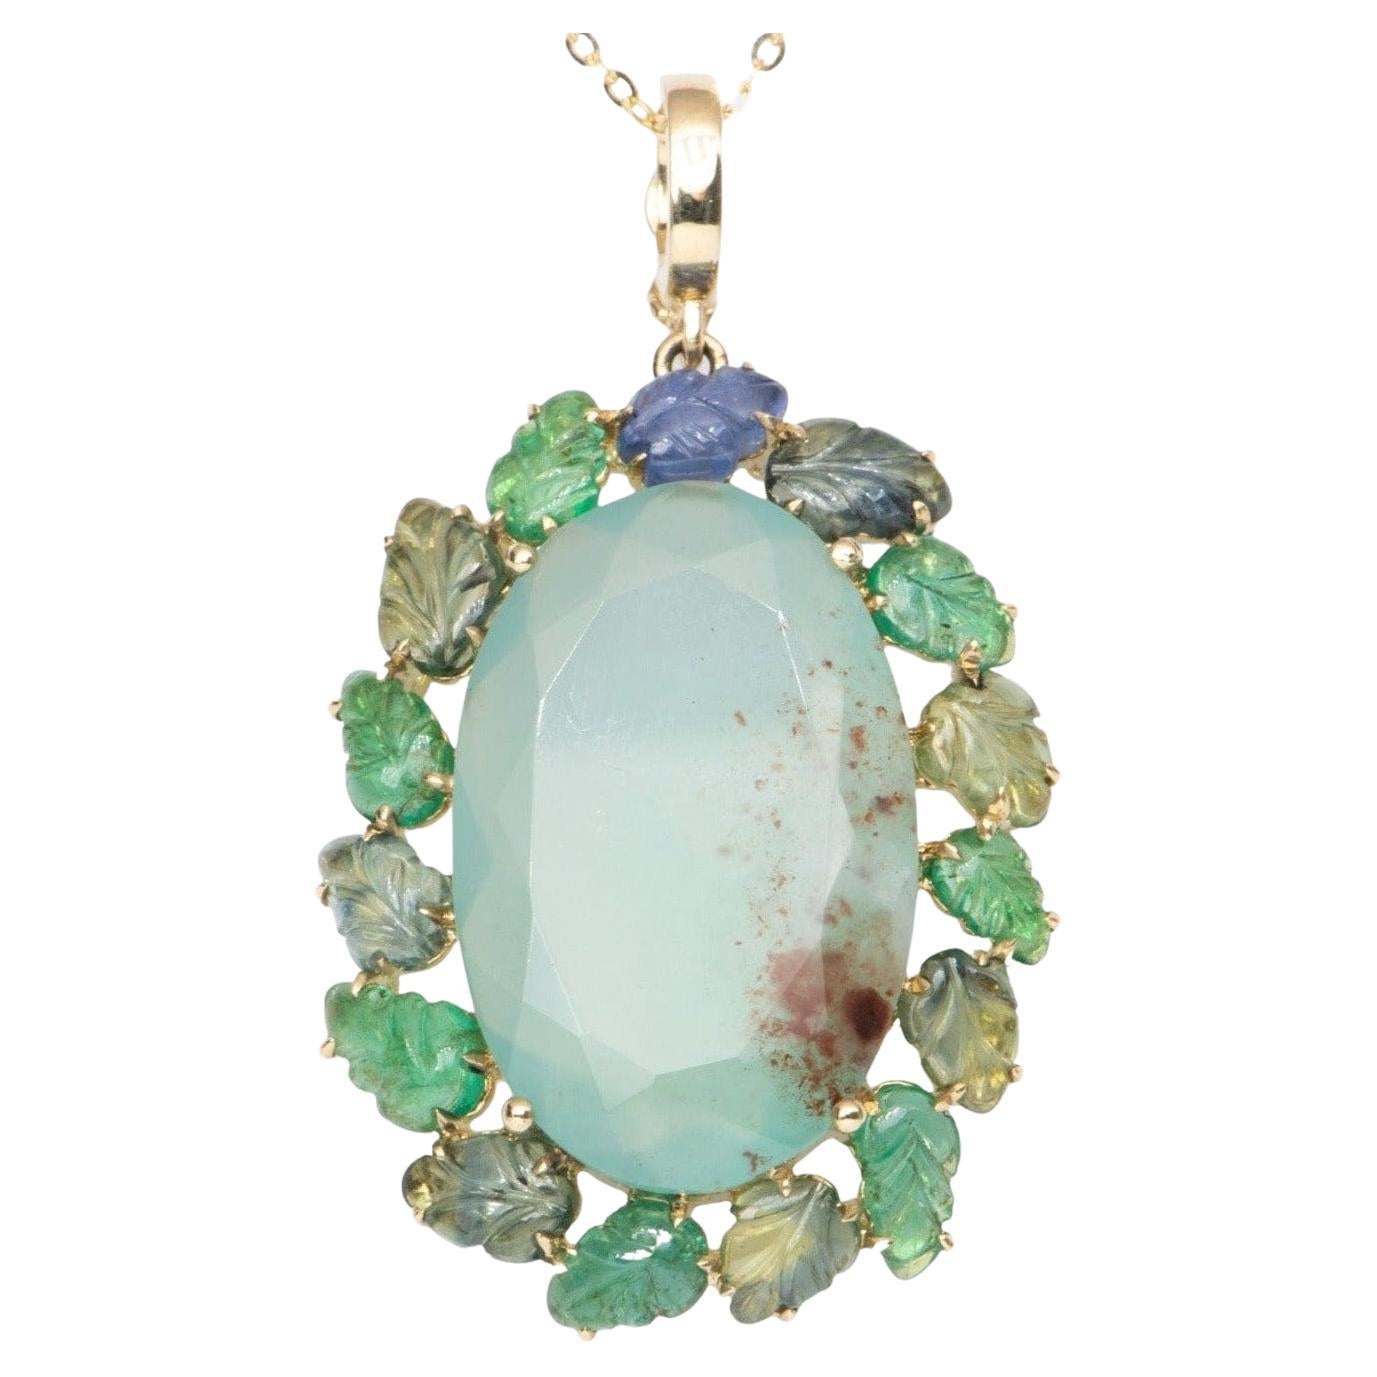 Statement Pendant Aquaprase with Emerald and Sapphire Carved Leaves 9k Gold